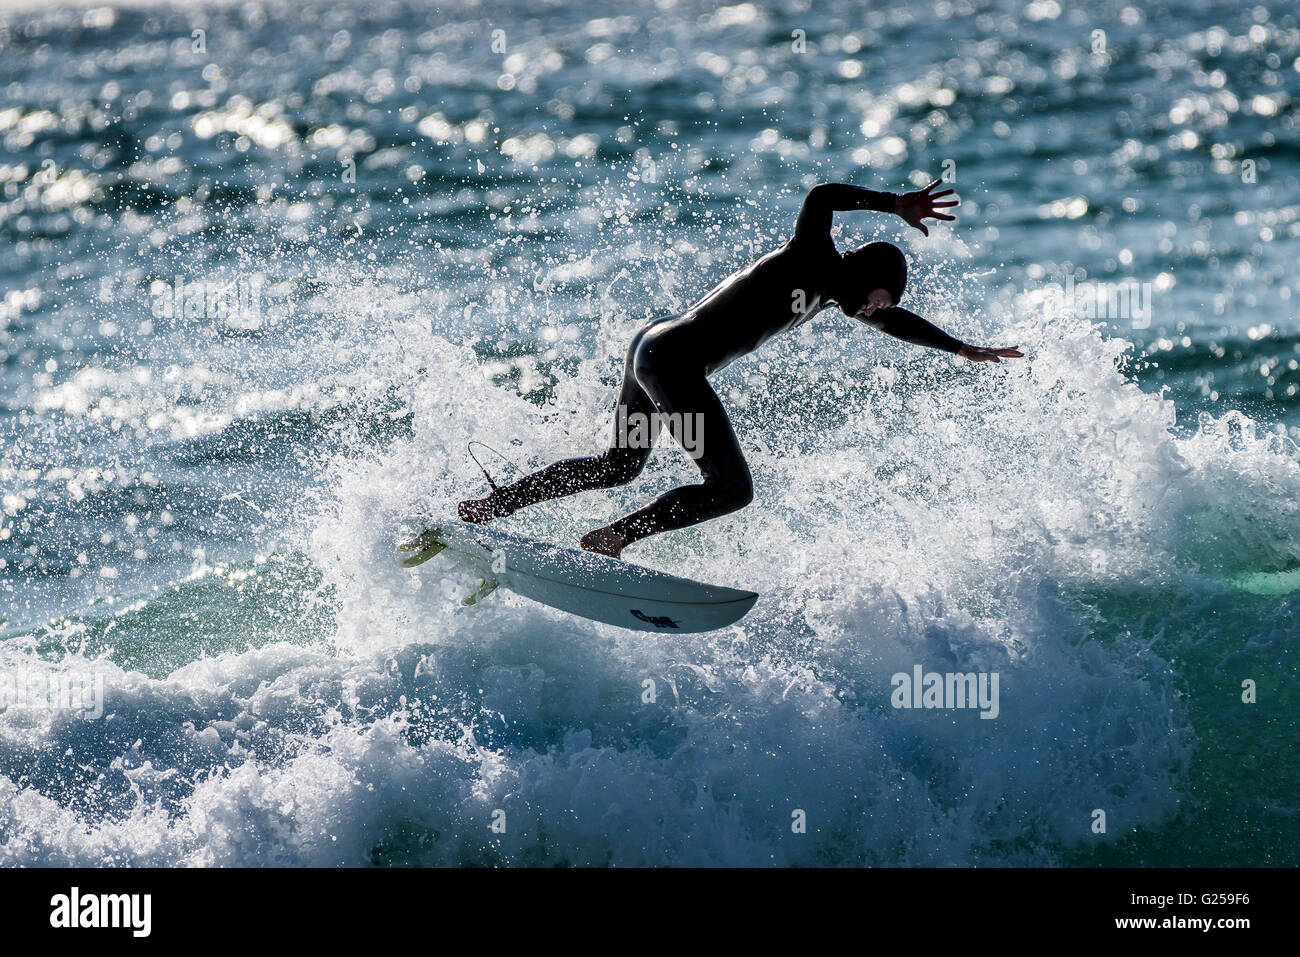 Windy weather creates ideal surfing conditions at Fistral in Newquay, Cornwall. Stock Photo